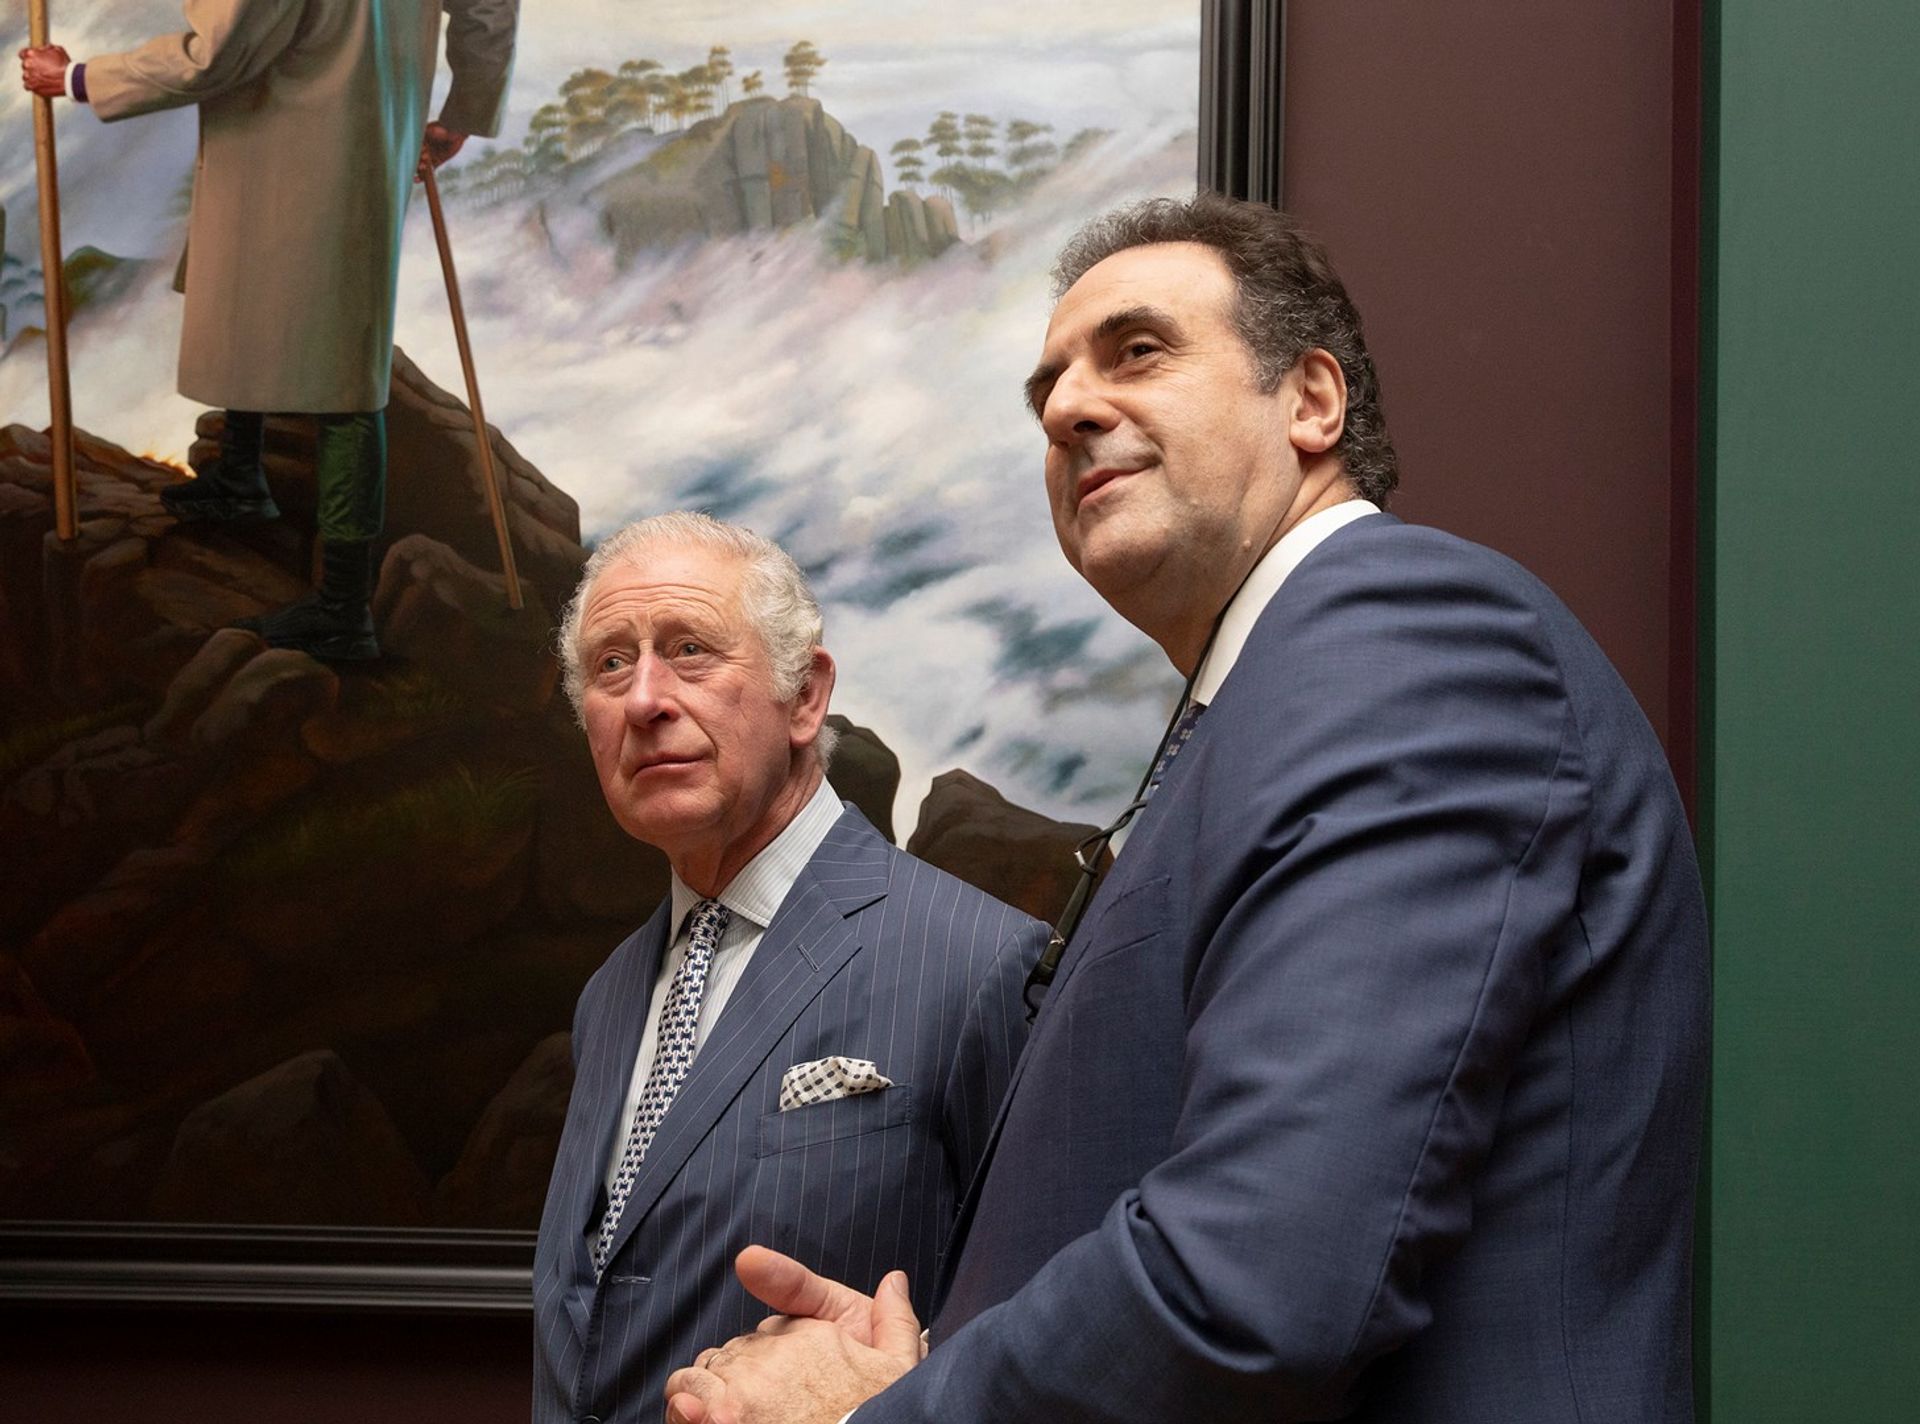 Prince Charles with National Gallery director Gabriele Finaldi, the day before he tested positive for Covid-19 Photo: National Gallery